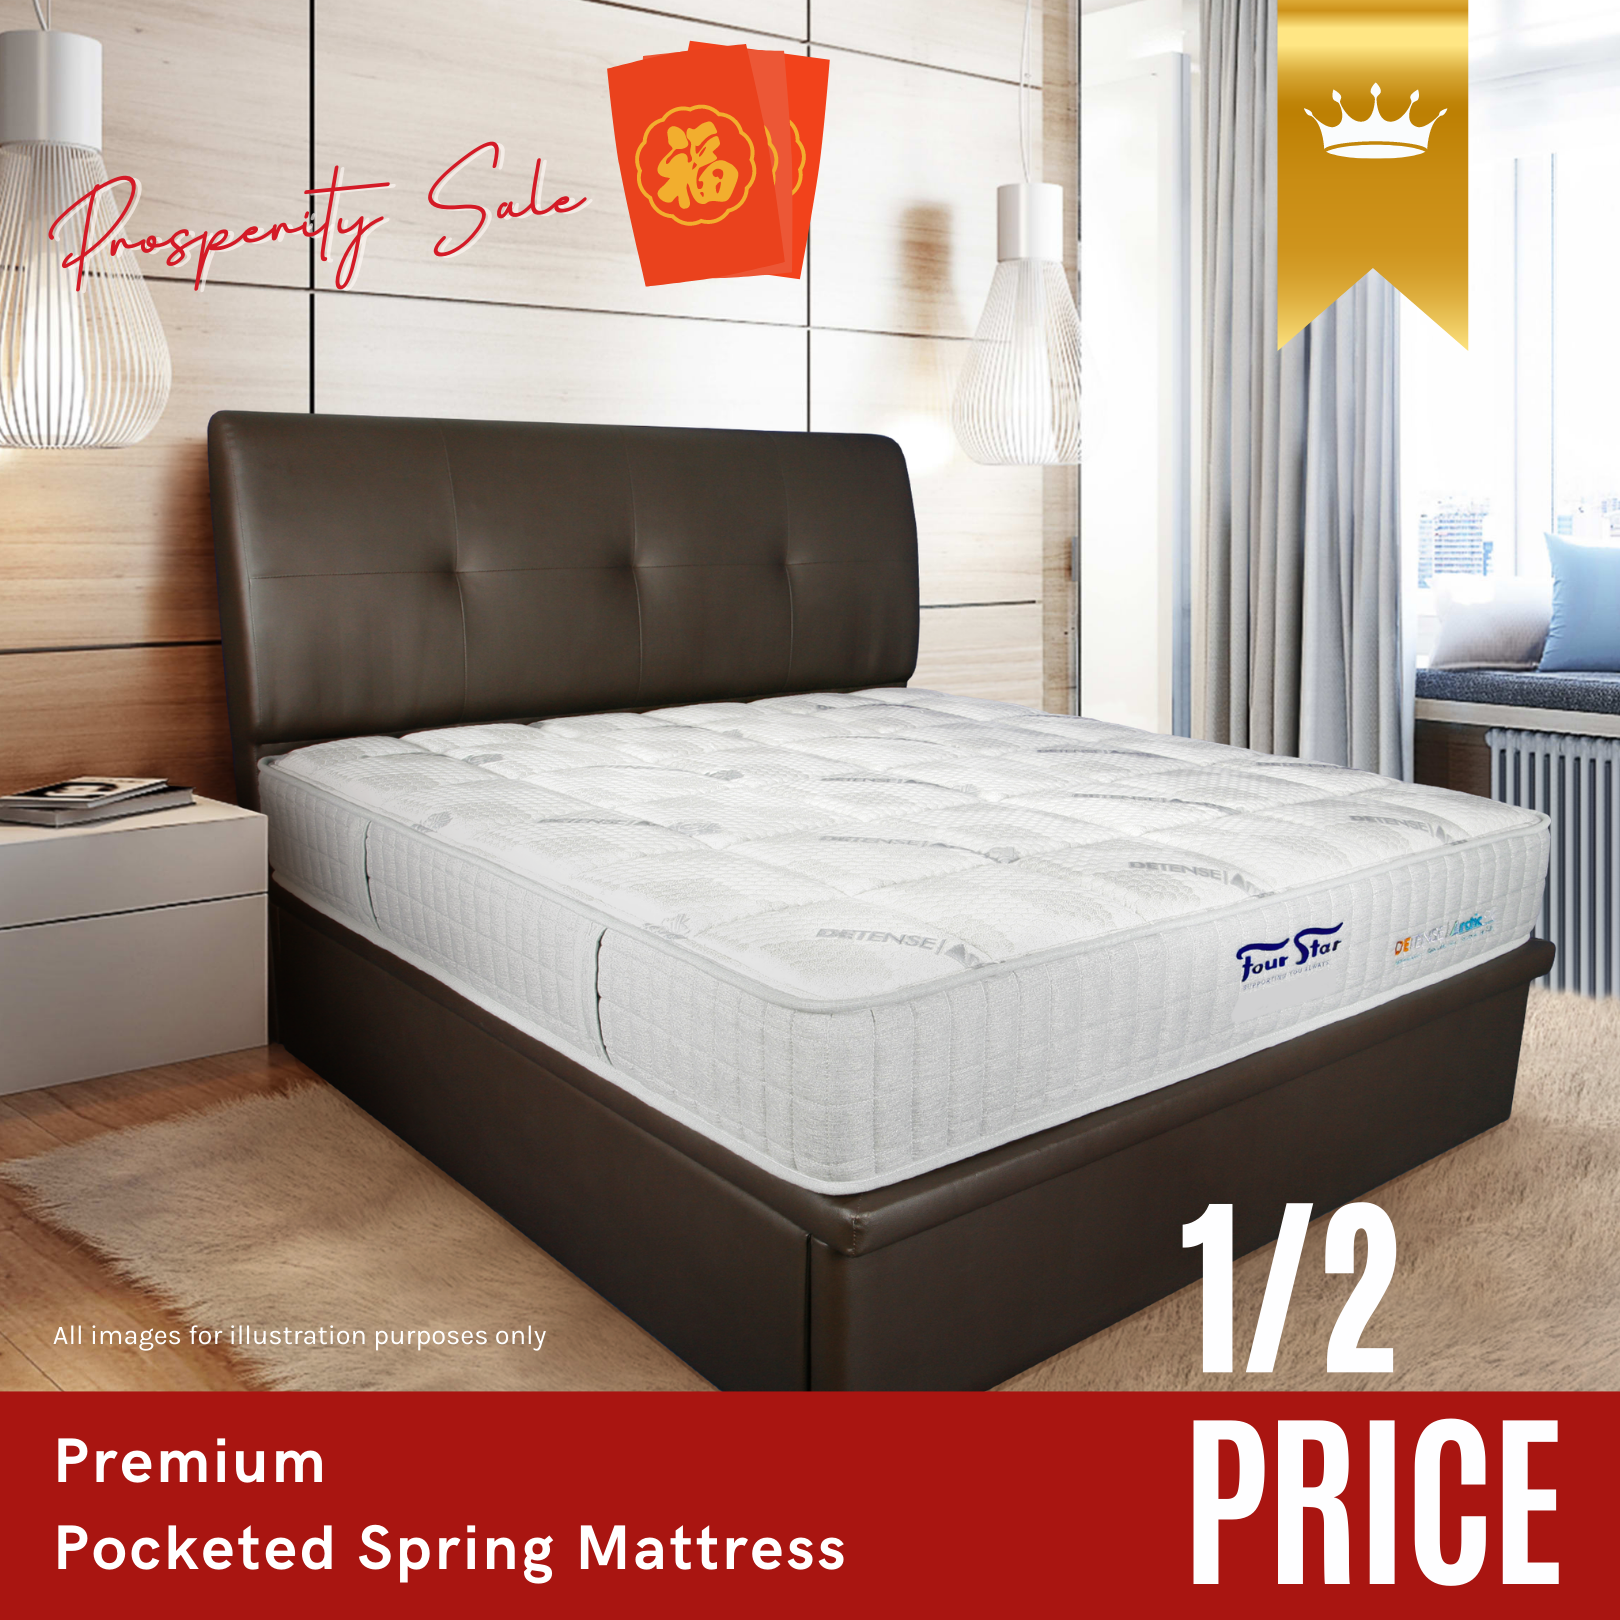 Lobang: Four Star's CNY Prosperity Sale Has Over 5,000 items At Up To 50% Off Including Mattresses, Bed Frames, Sofas & More - 5